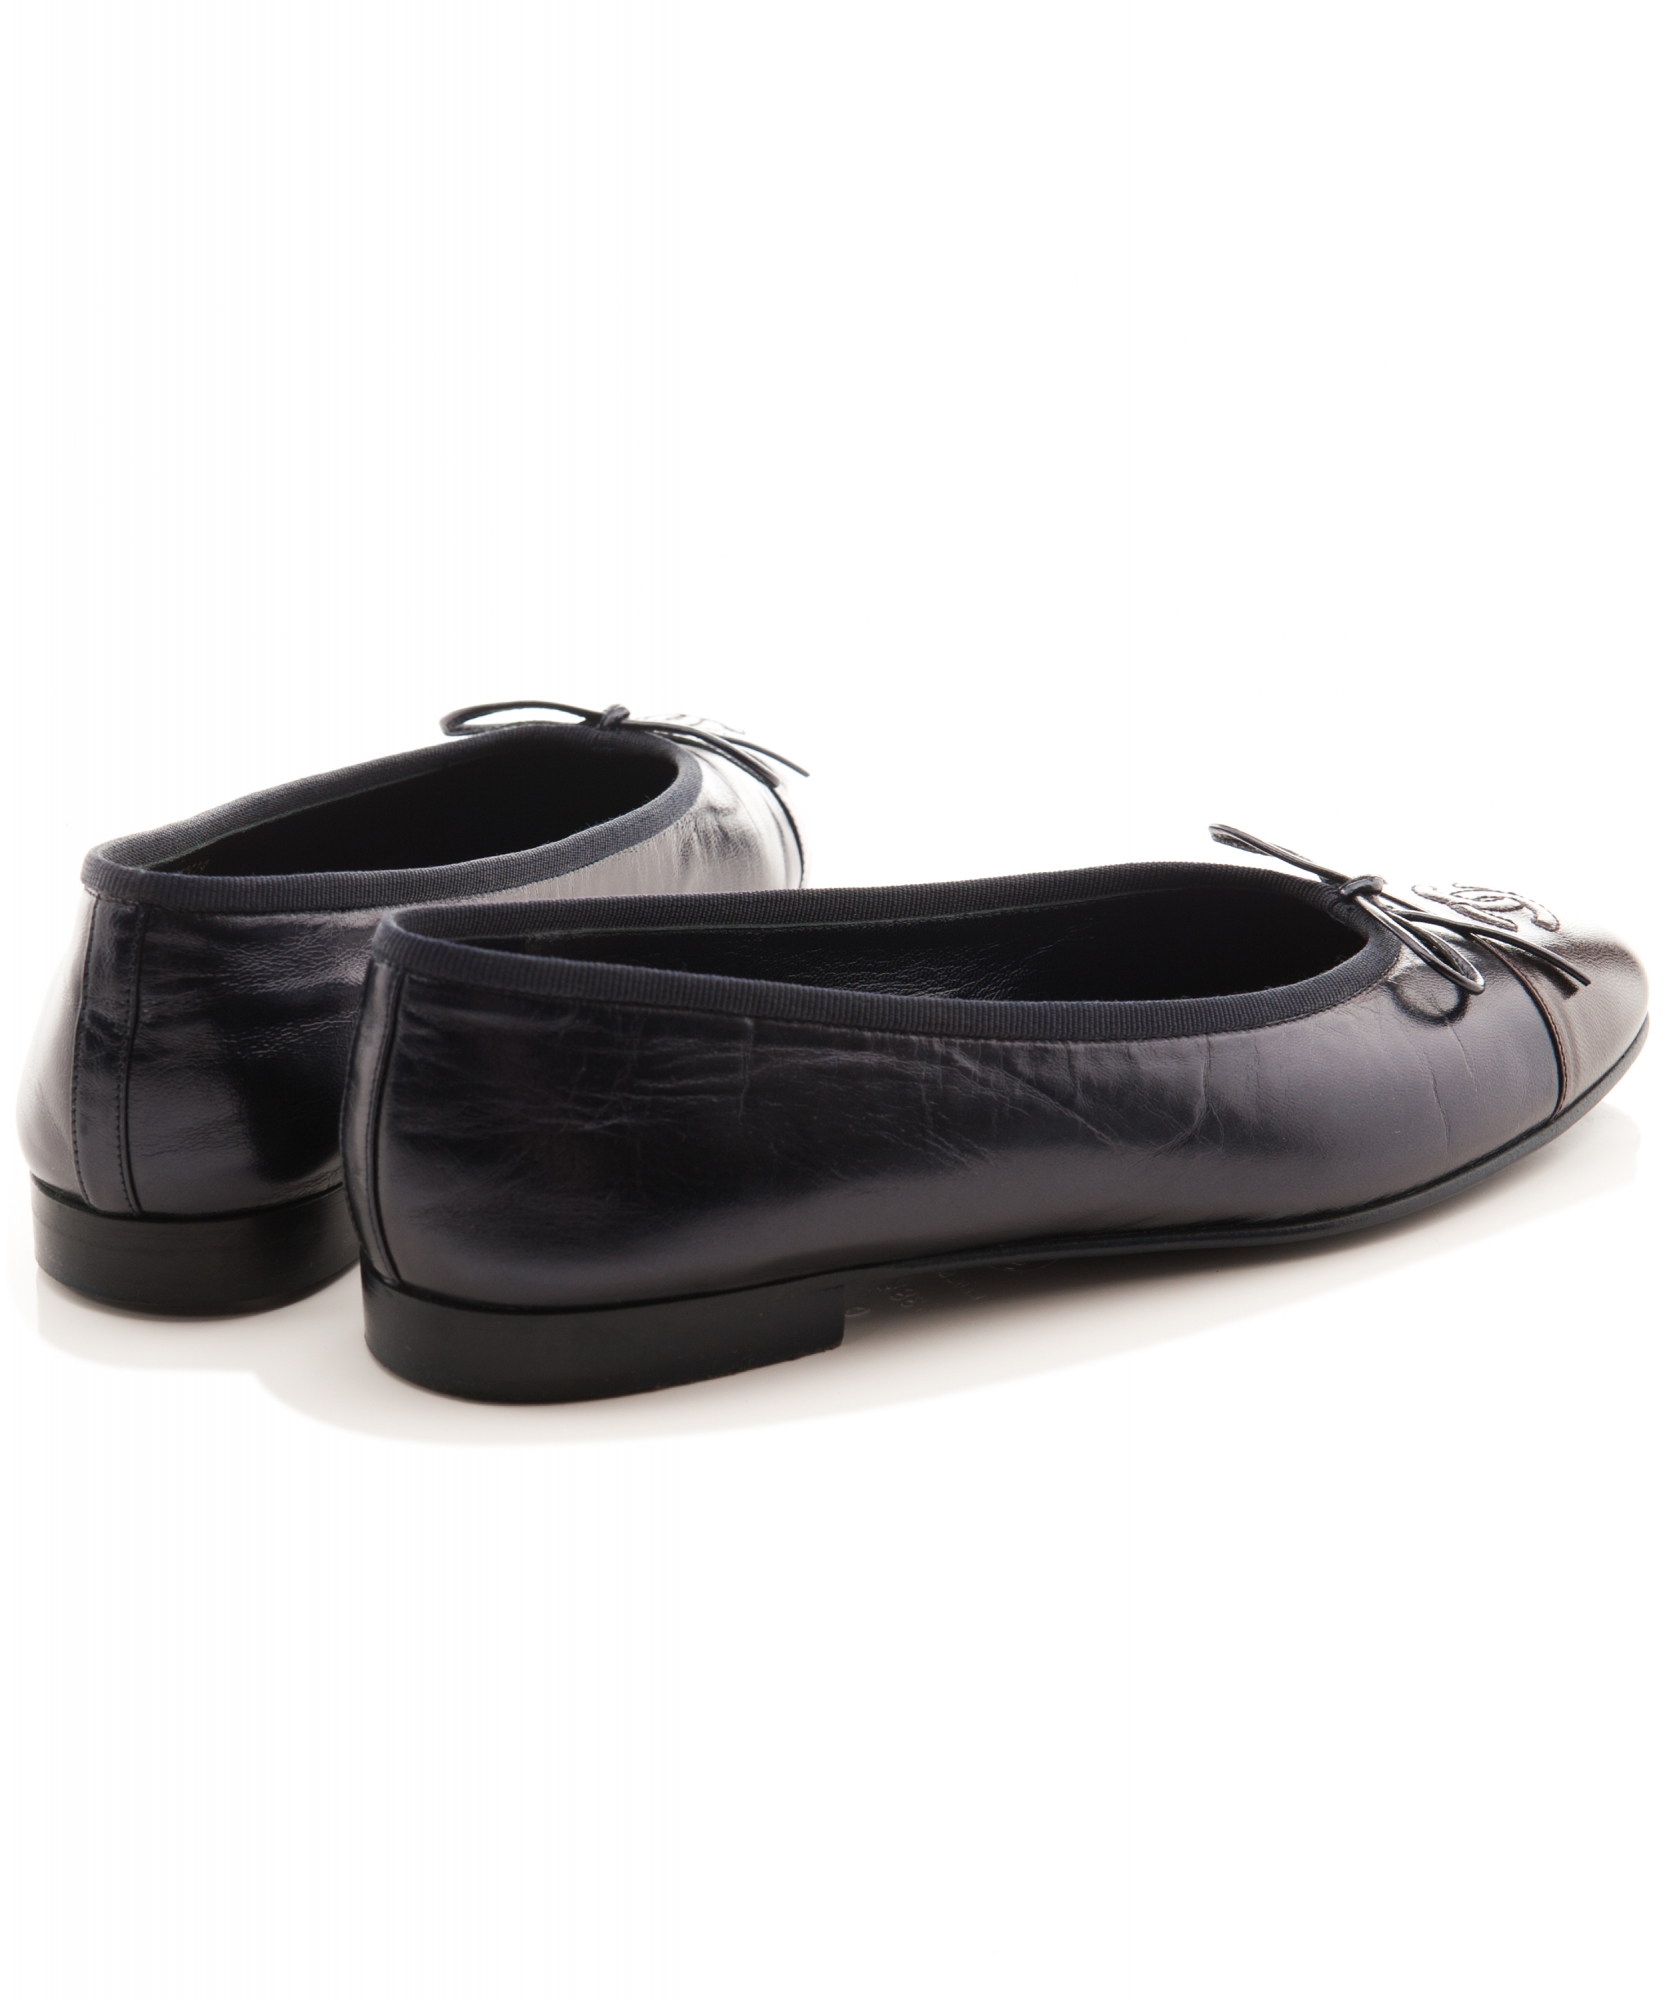 Leather ballet flats Chanel Black size 39 EU in Leather - 26640221